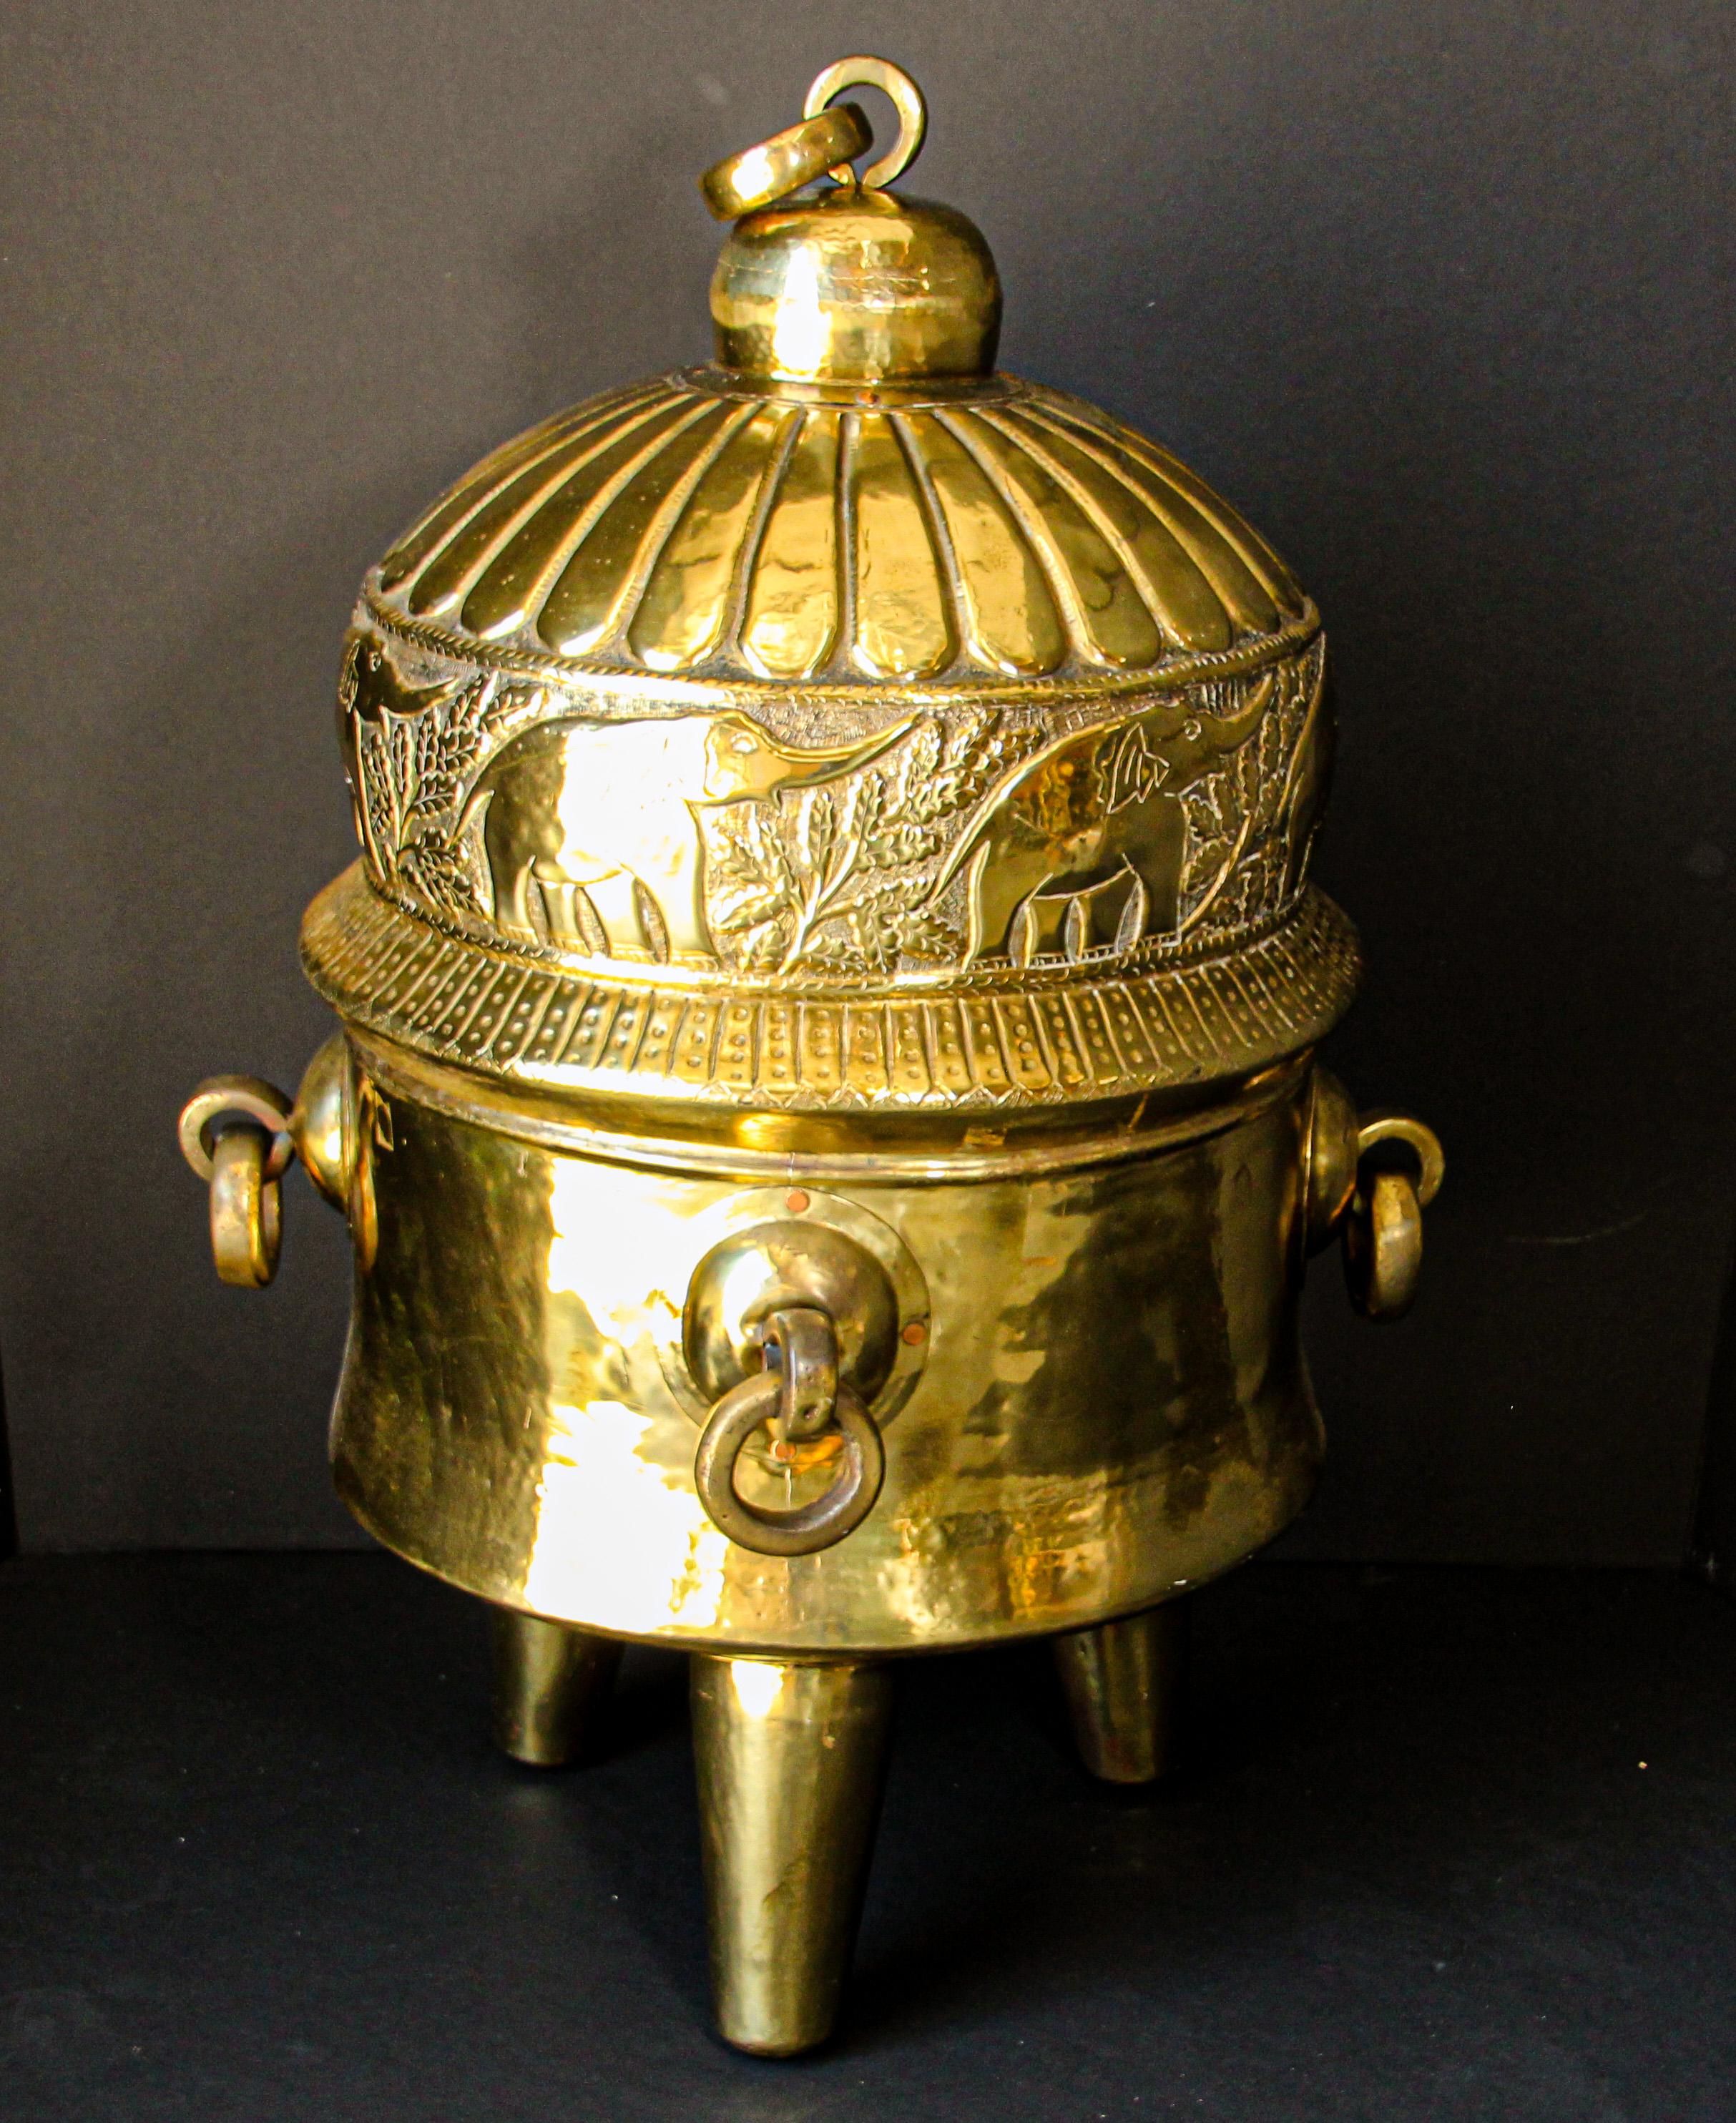 Oversized gigantic antique polished brass and copper Asian container for precious textiles, clothes and jewellery.
This vessel formed an important part of the dowry given to a kathi bride.
Museum quality piece on tripod, with the cover hand carved